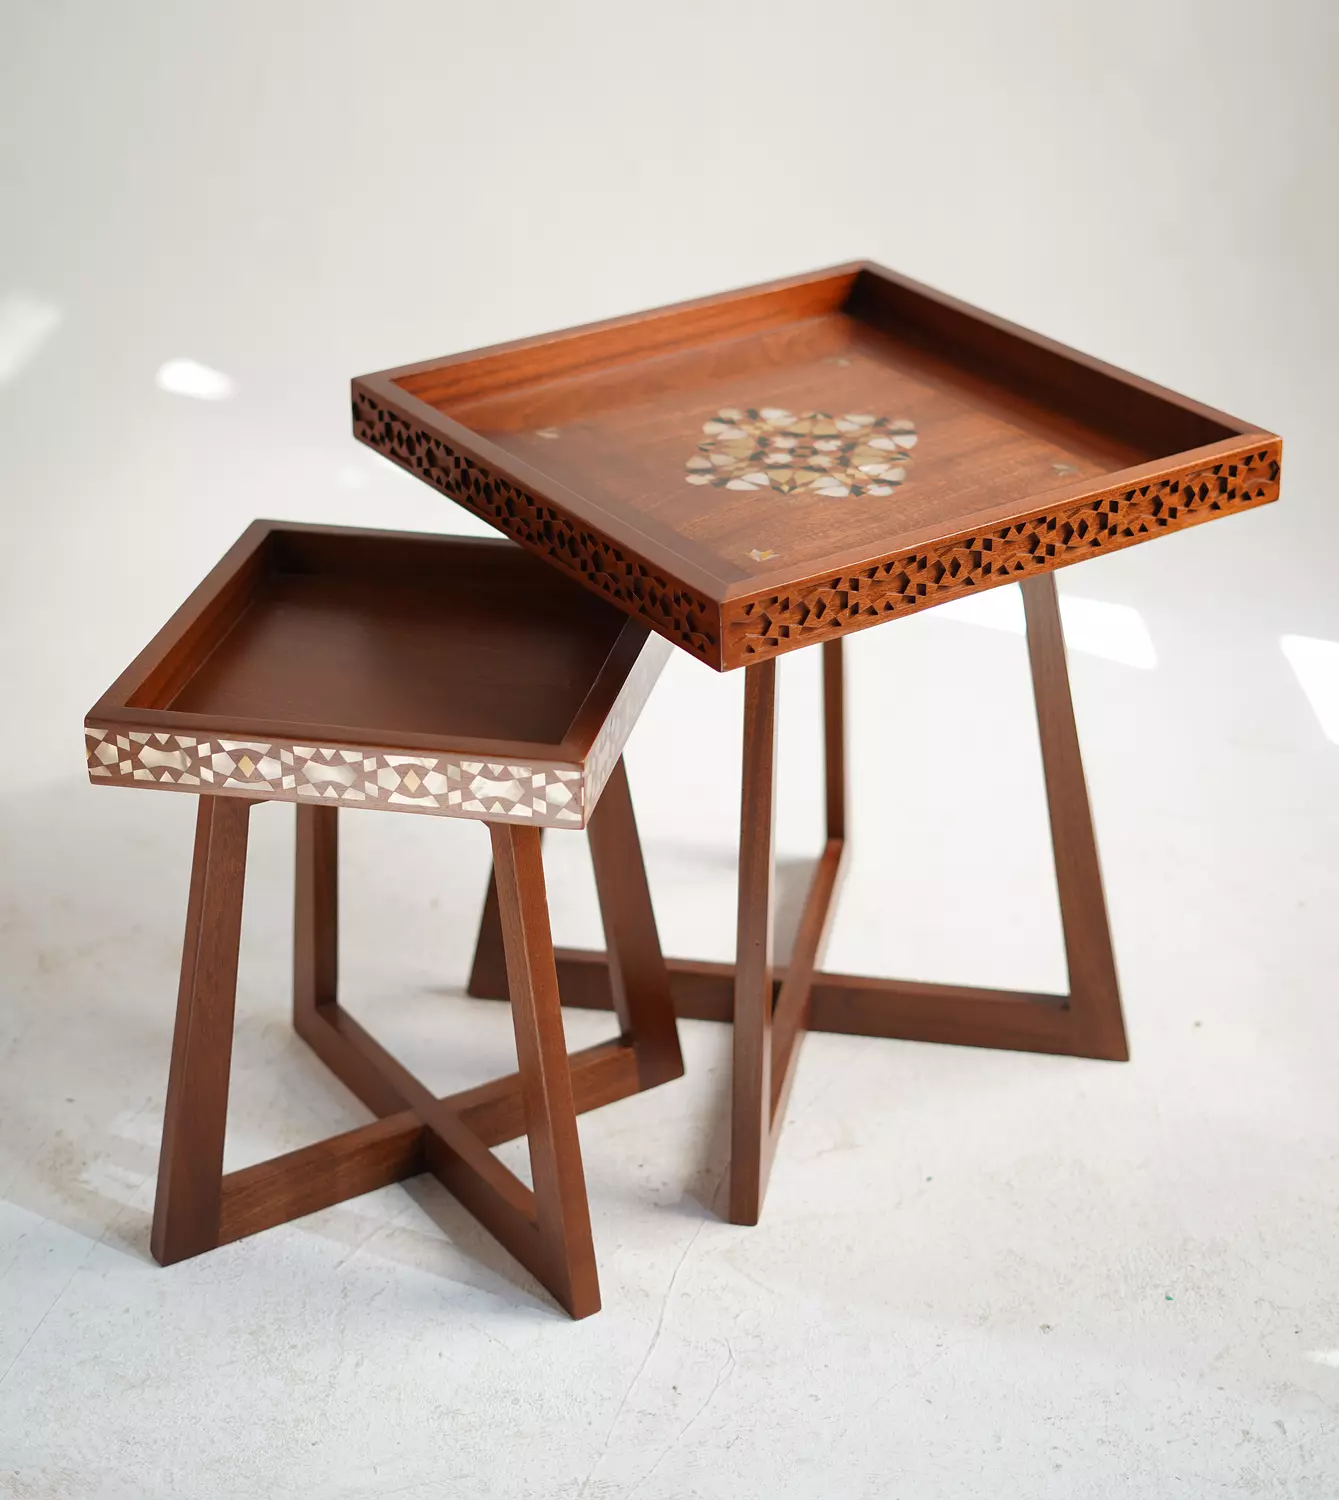 Qijmas side table 2 0